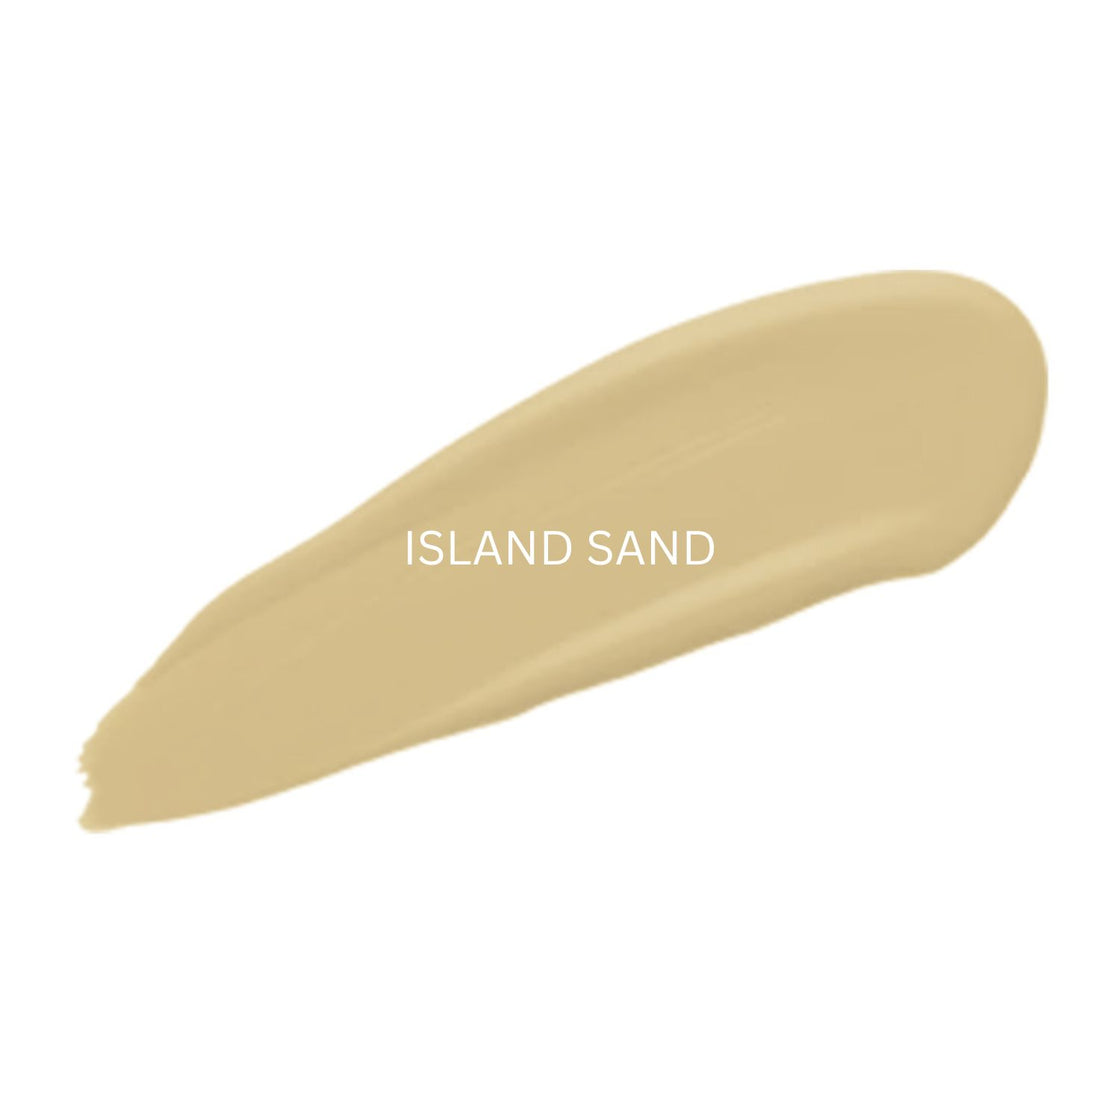 Paul Penders Hand Made Moisture Cream Foundation For A Natural Cover - Island Sand 30g